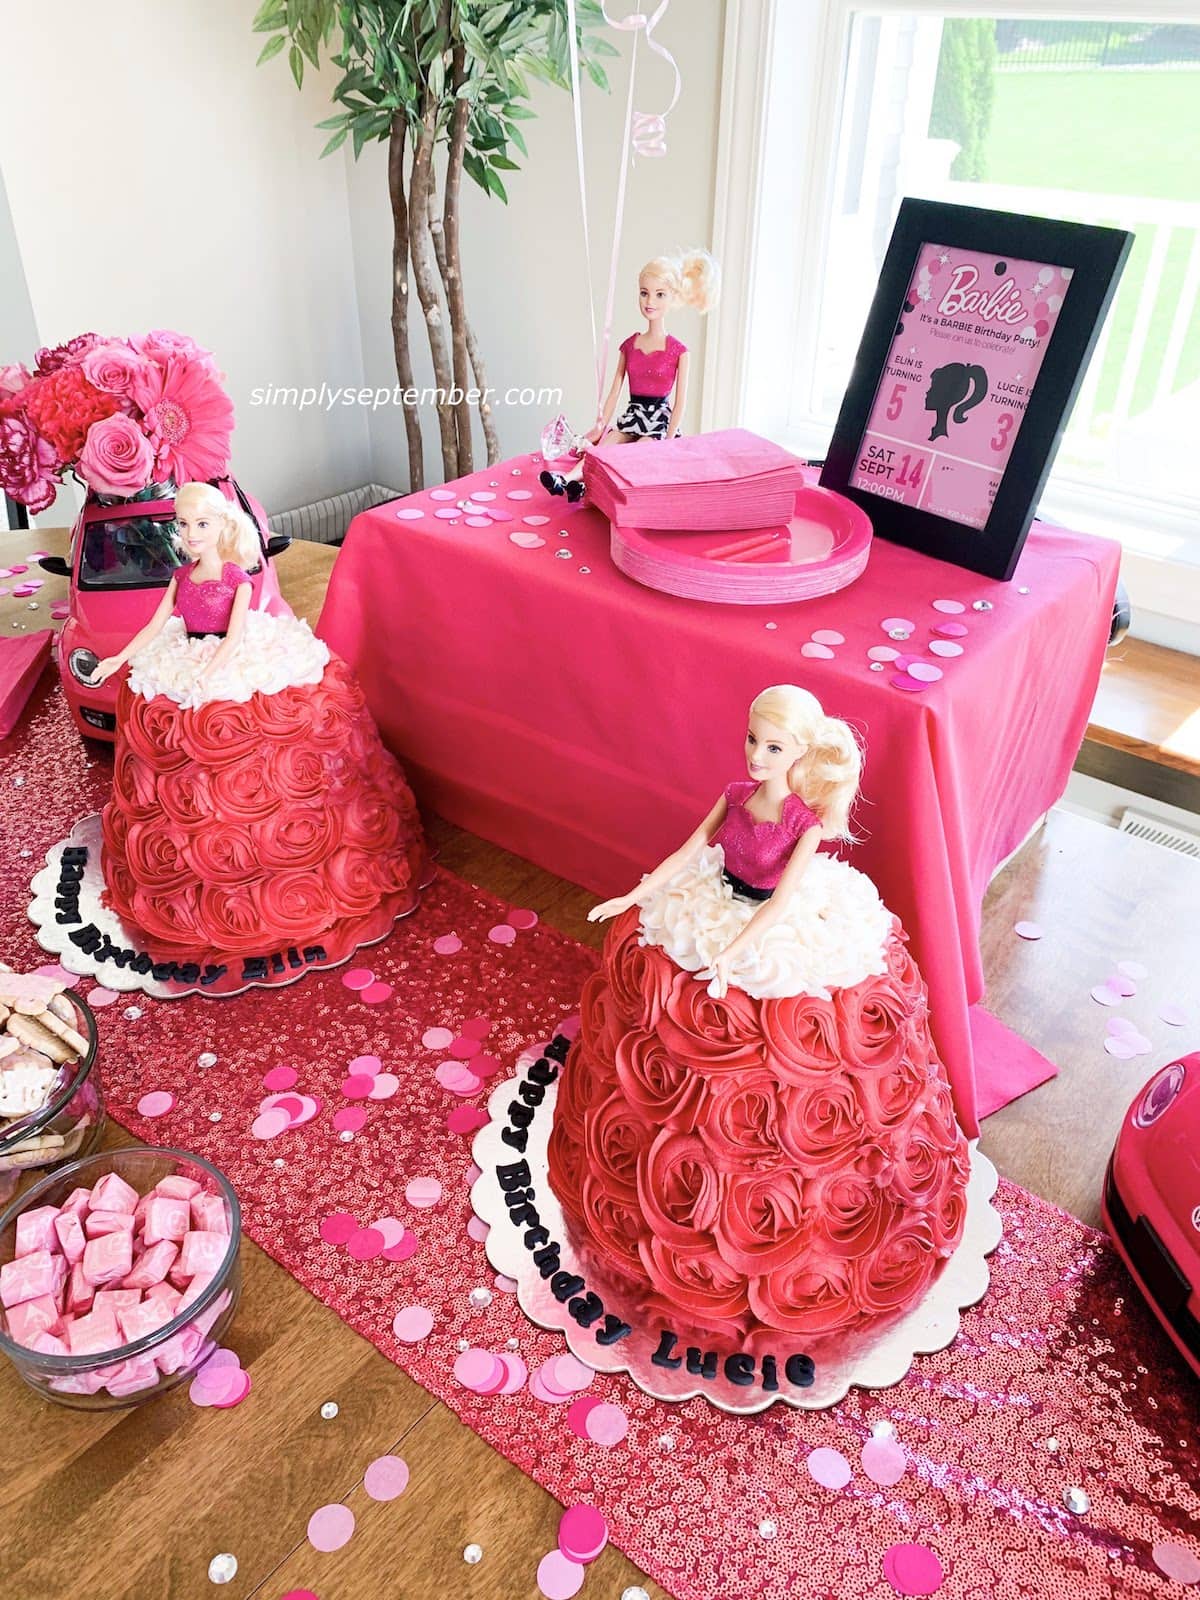 How to Easily Host a Barbie Birthday Party - Simply September